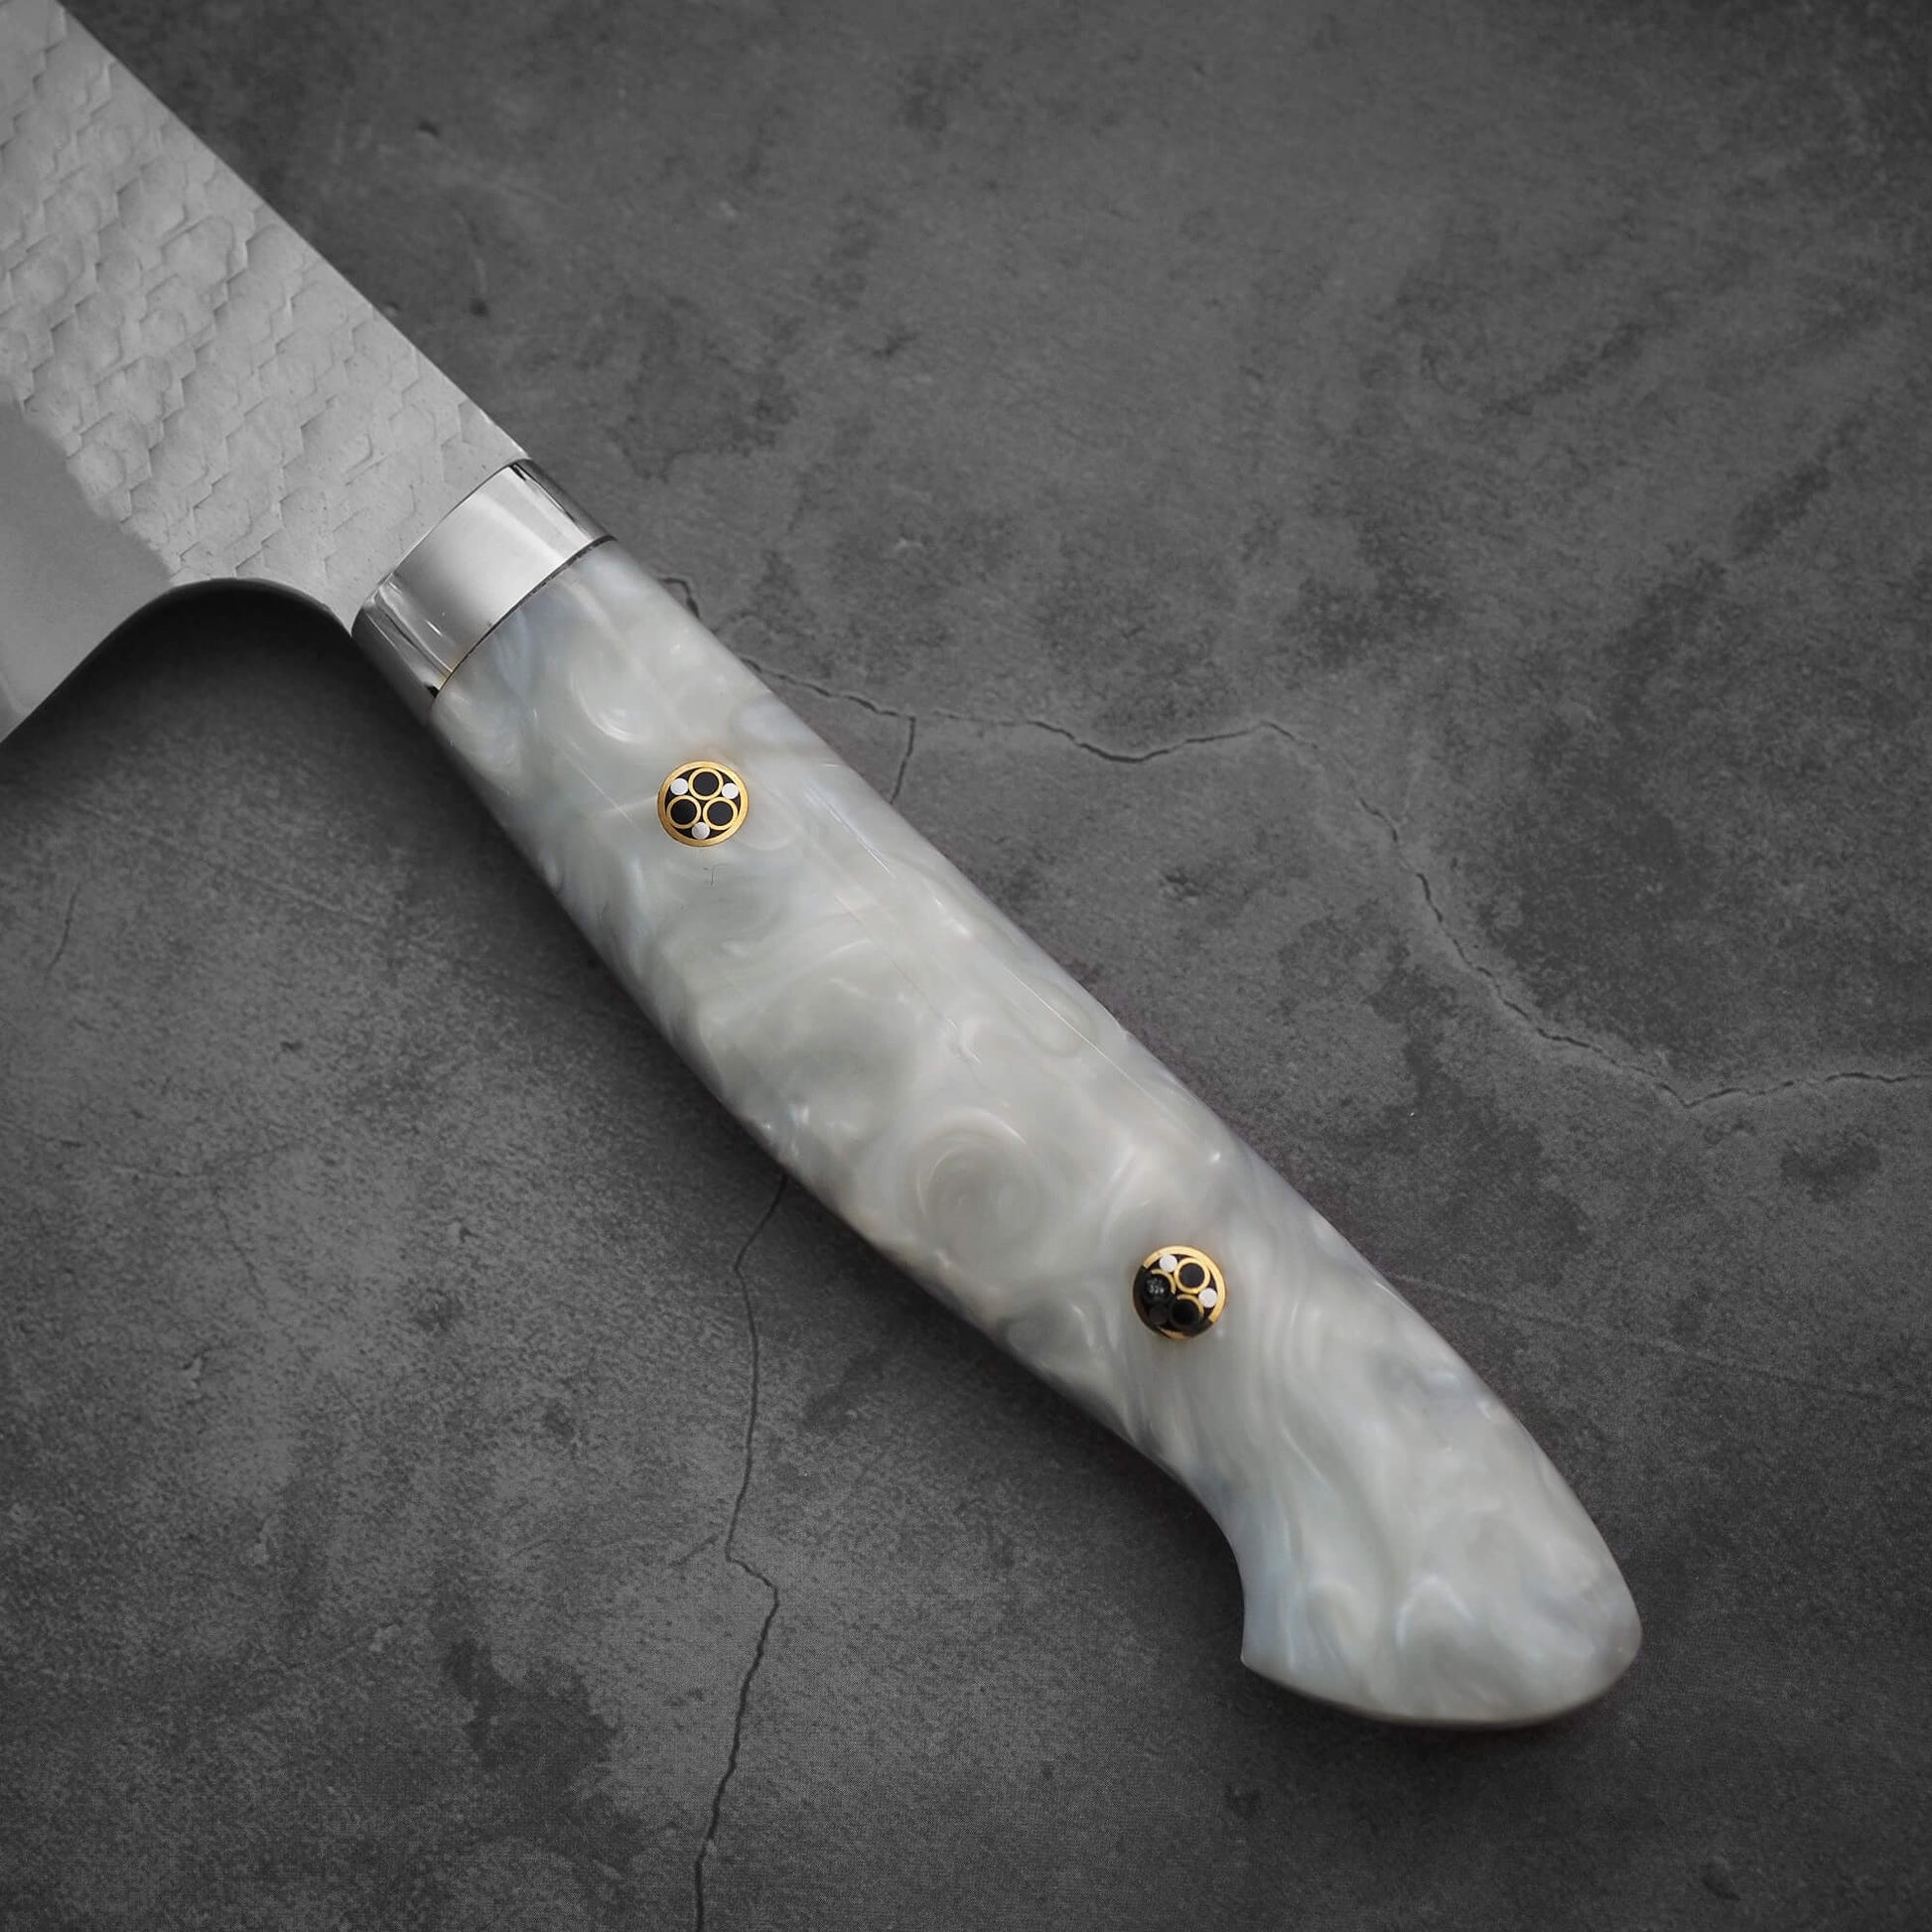 Close up view of the handle of 210mm Nigara tsuchime SG2 gyuto knife with pearl handle resin